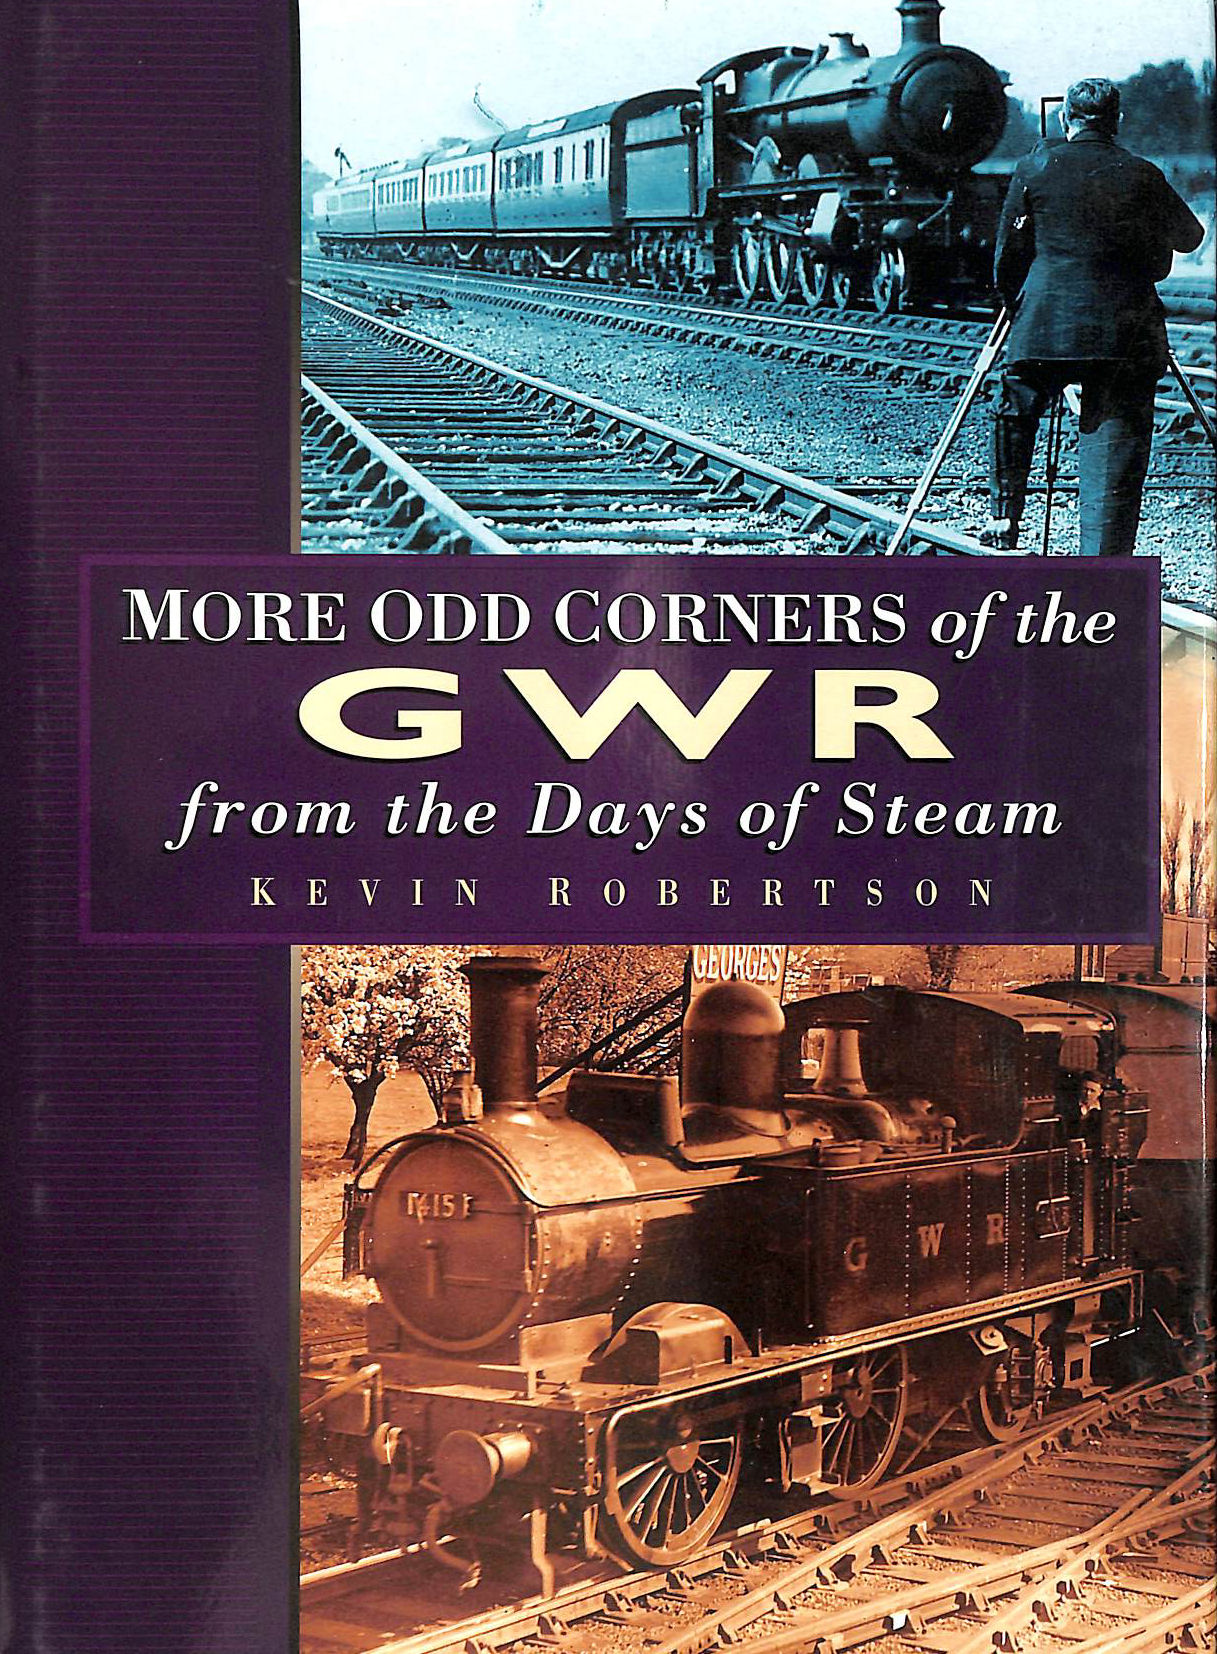 KEVIN ROBERTSON - More Odd Corners of the GWR: From the Days of Steam